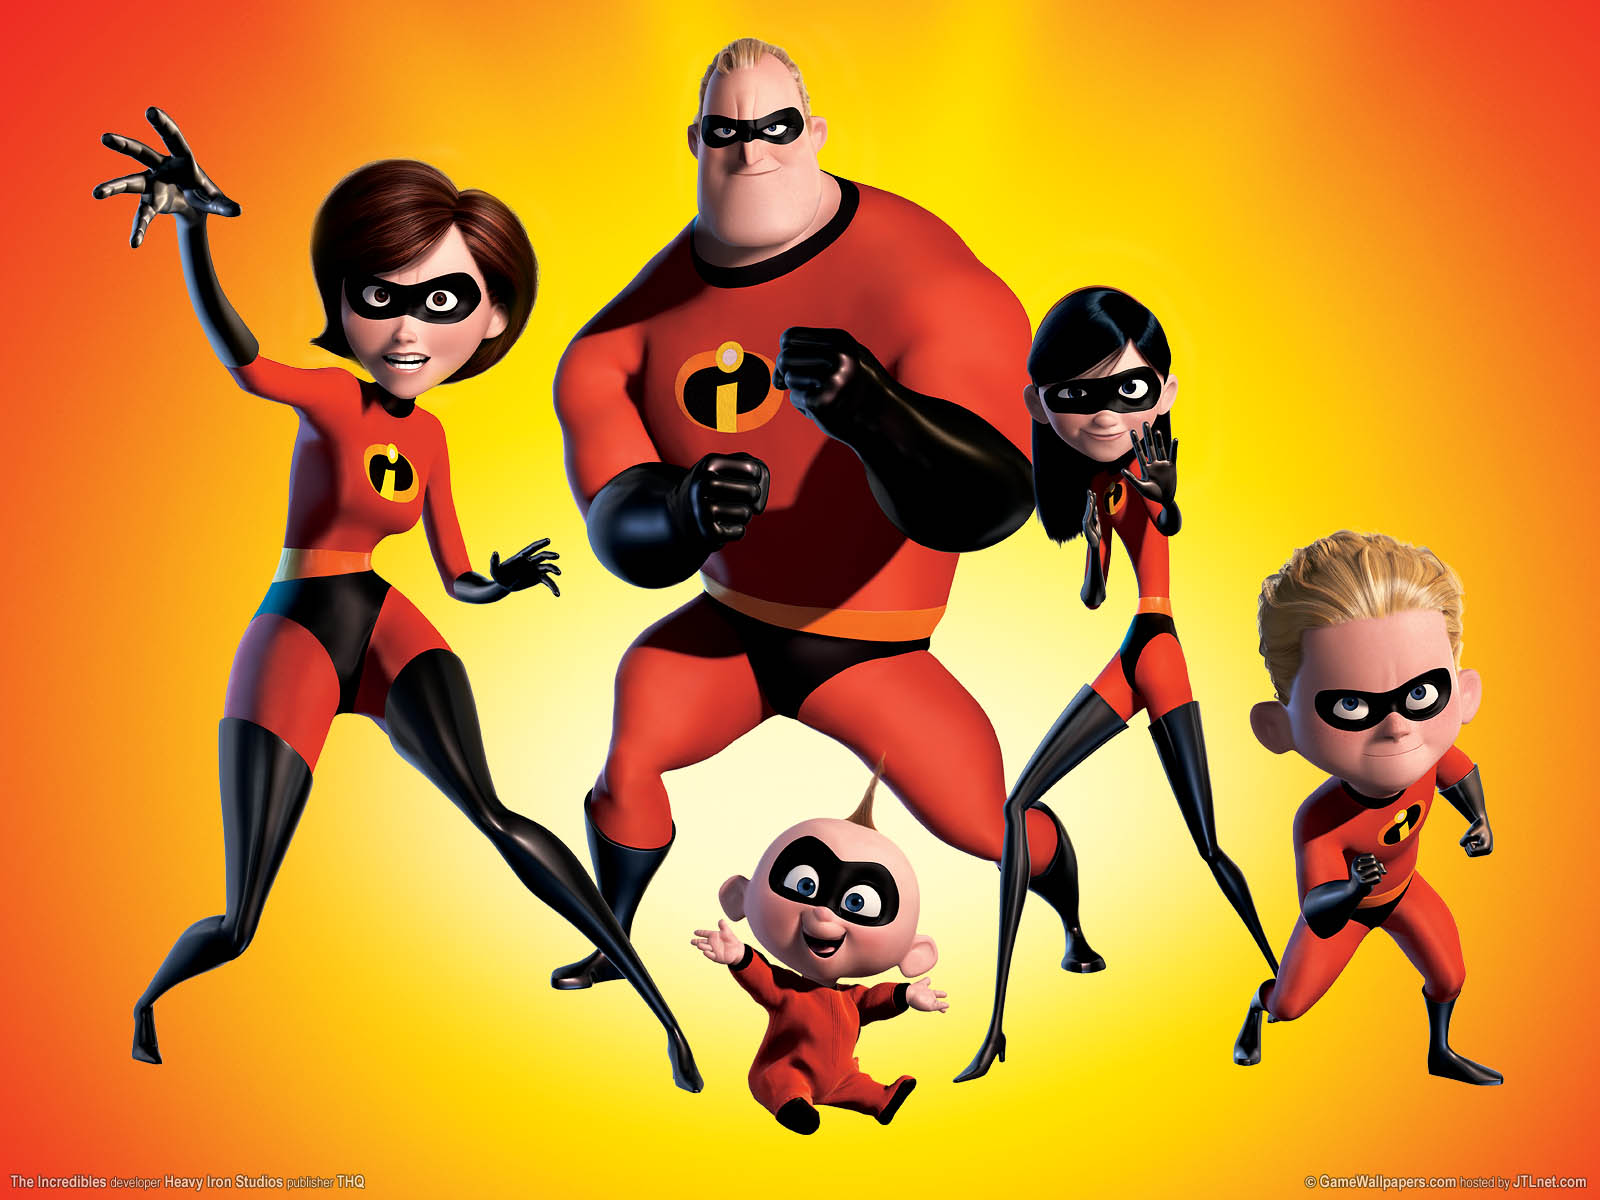 The Incredibles wallpaper 01 1600x1200